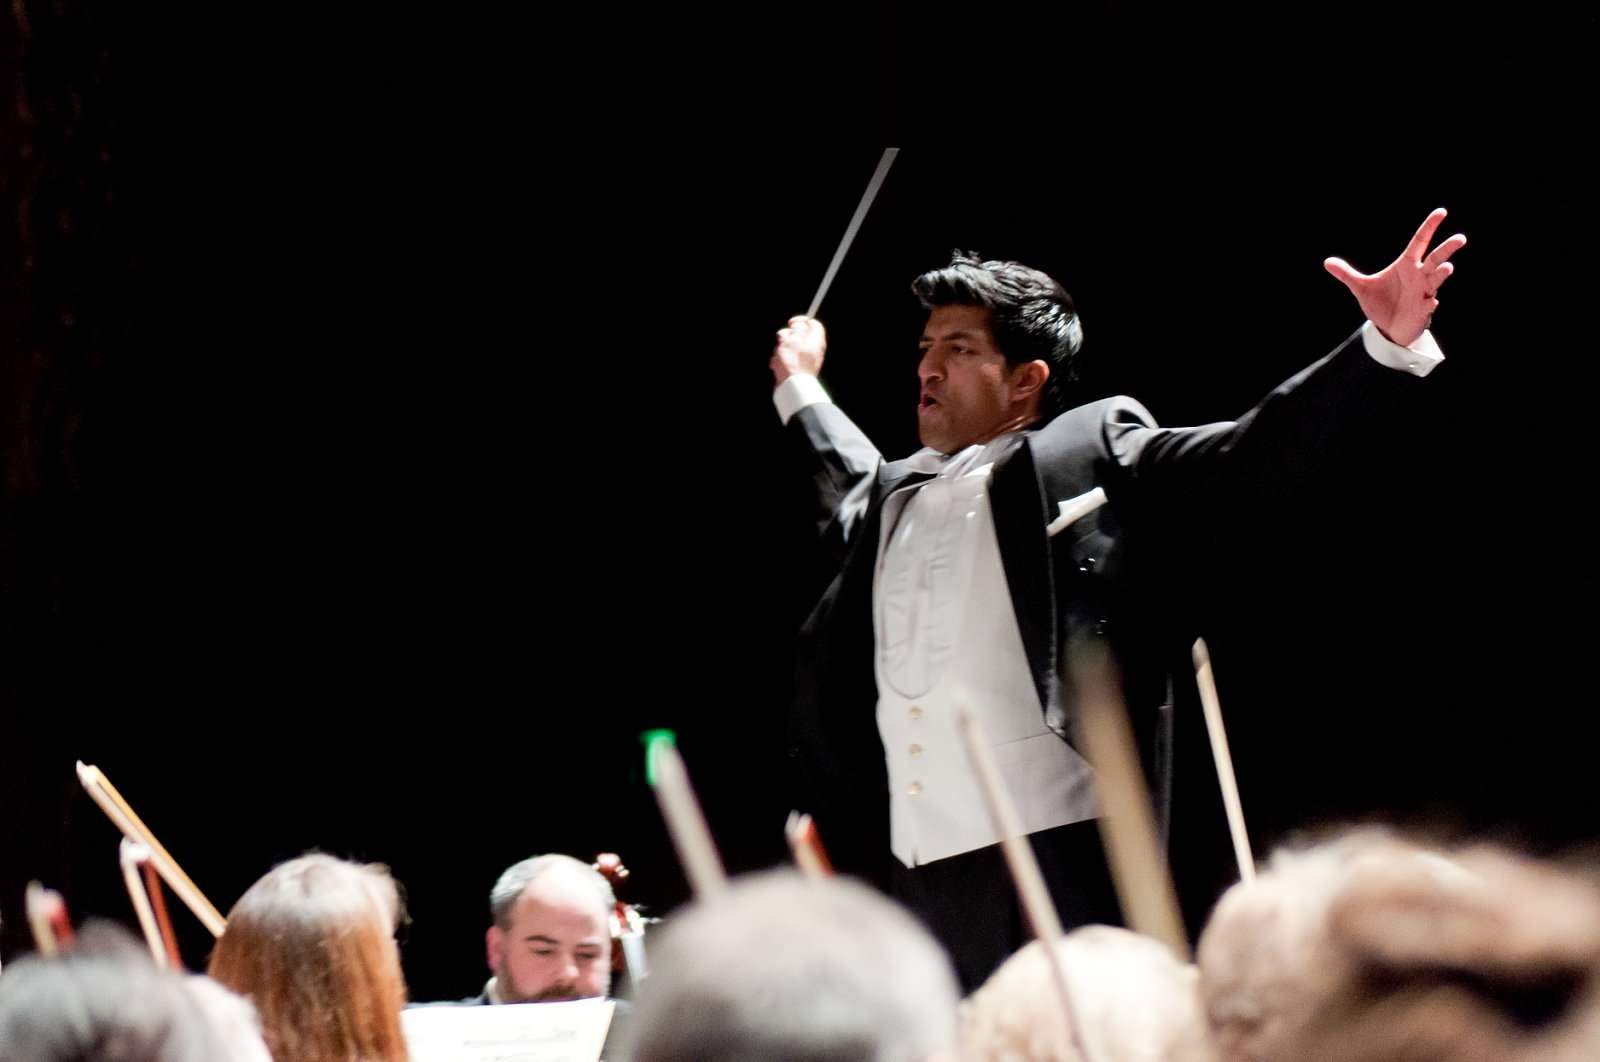 Orchestra conductor